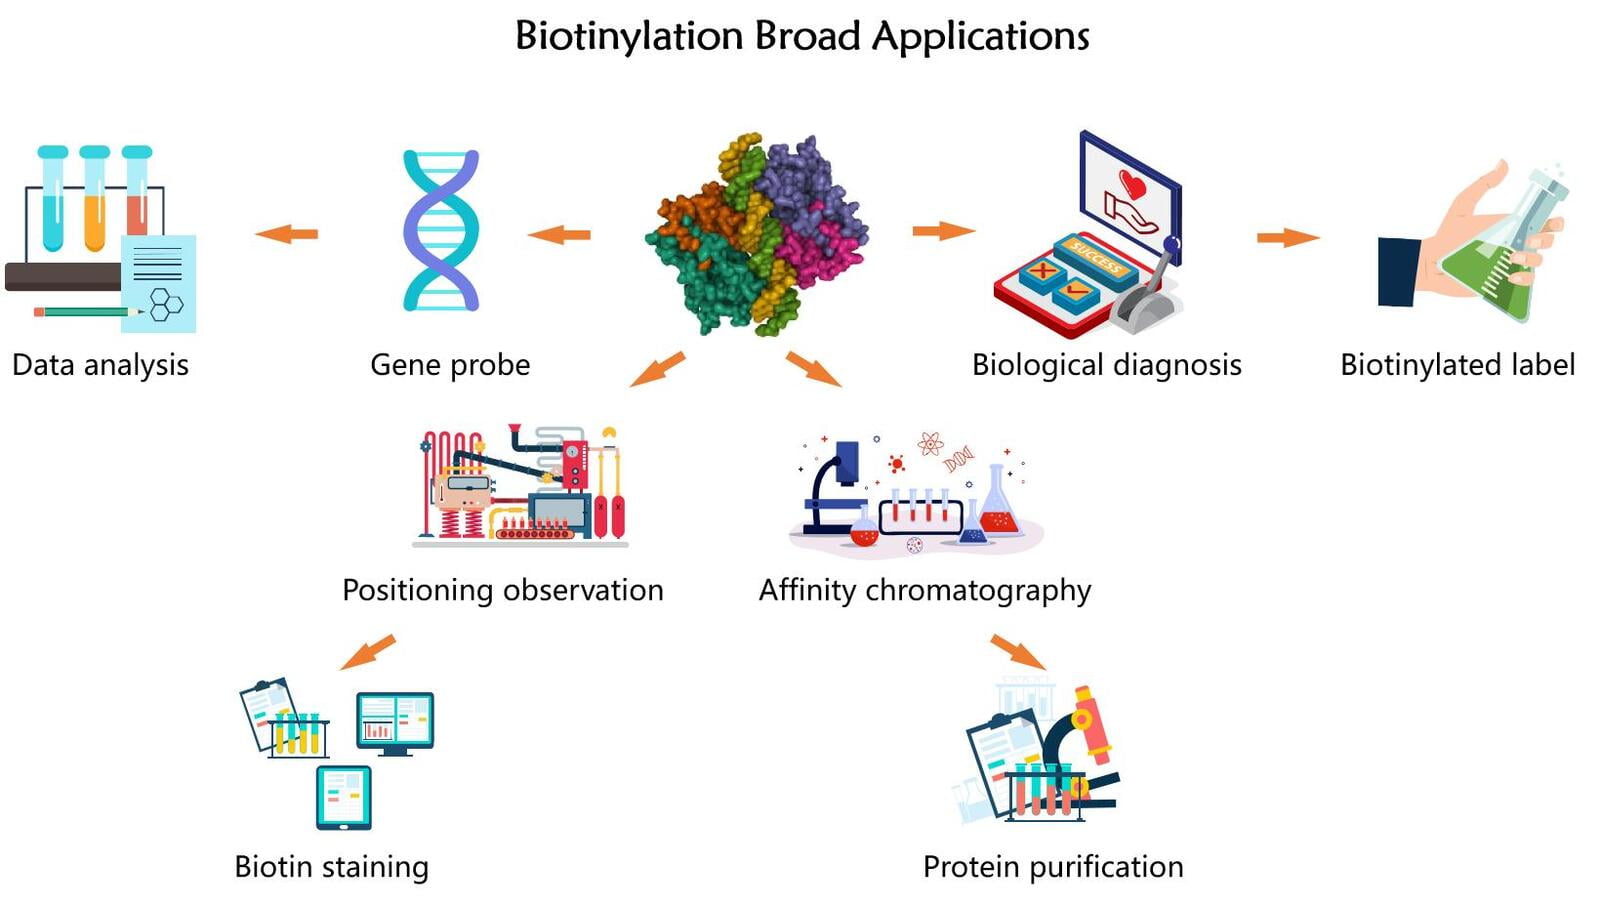 Professional biotinylation system has great application potential in the fields of biological diagnosis, affinity chromatography, localization observation and gene probe